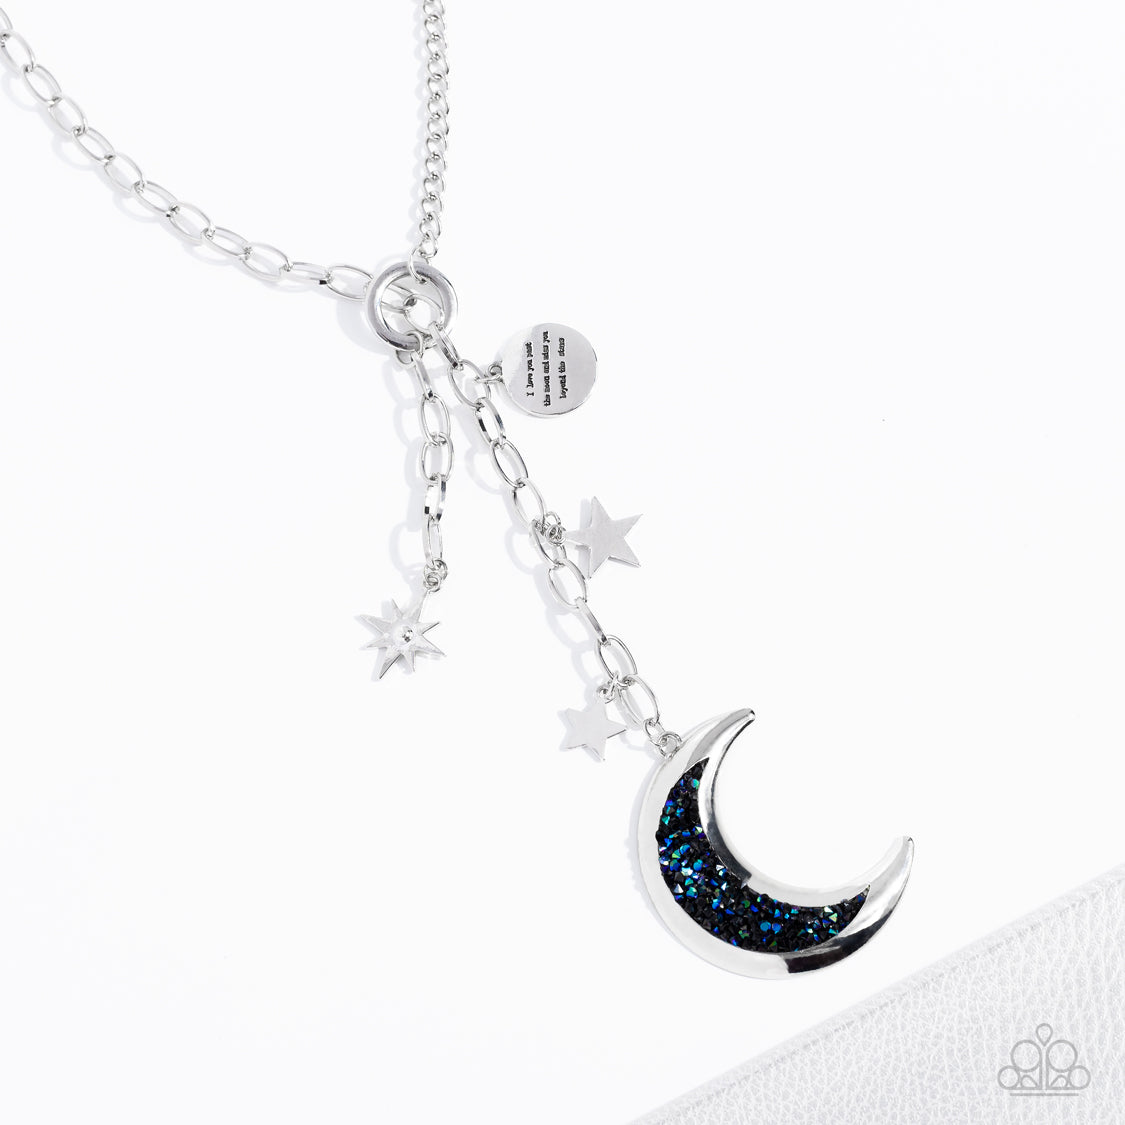 necklace, long necklace, affordable jewelry, pendant, moon, silver, iridescent, oil spill, star jewelry, paparazzi accessories, empire diamond, life of the party, affordable holiday gift, everyday jewelry, trending jewelry, viral jewelry, jewelry stores, jewlery stores near me, 